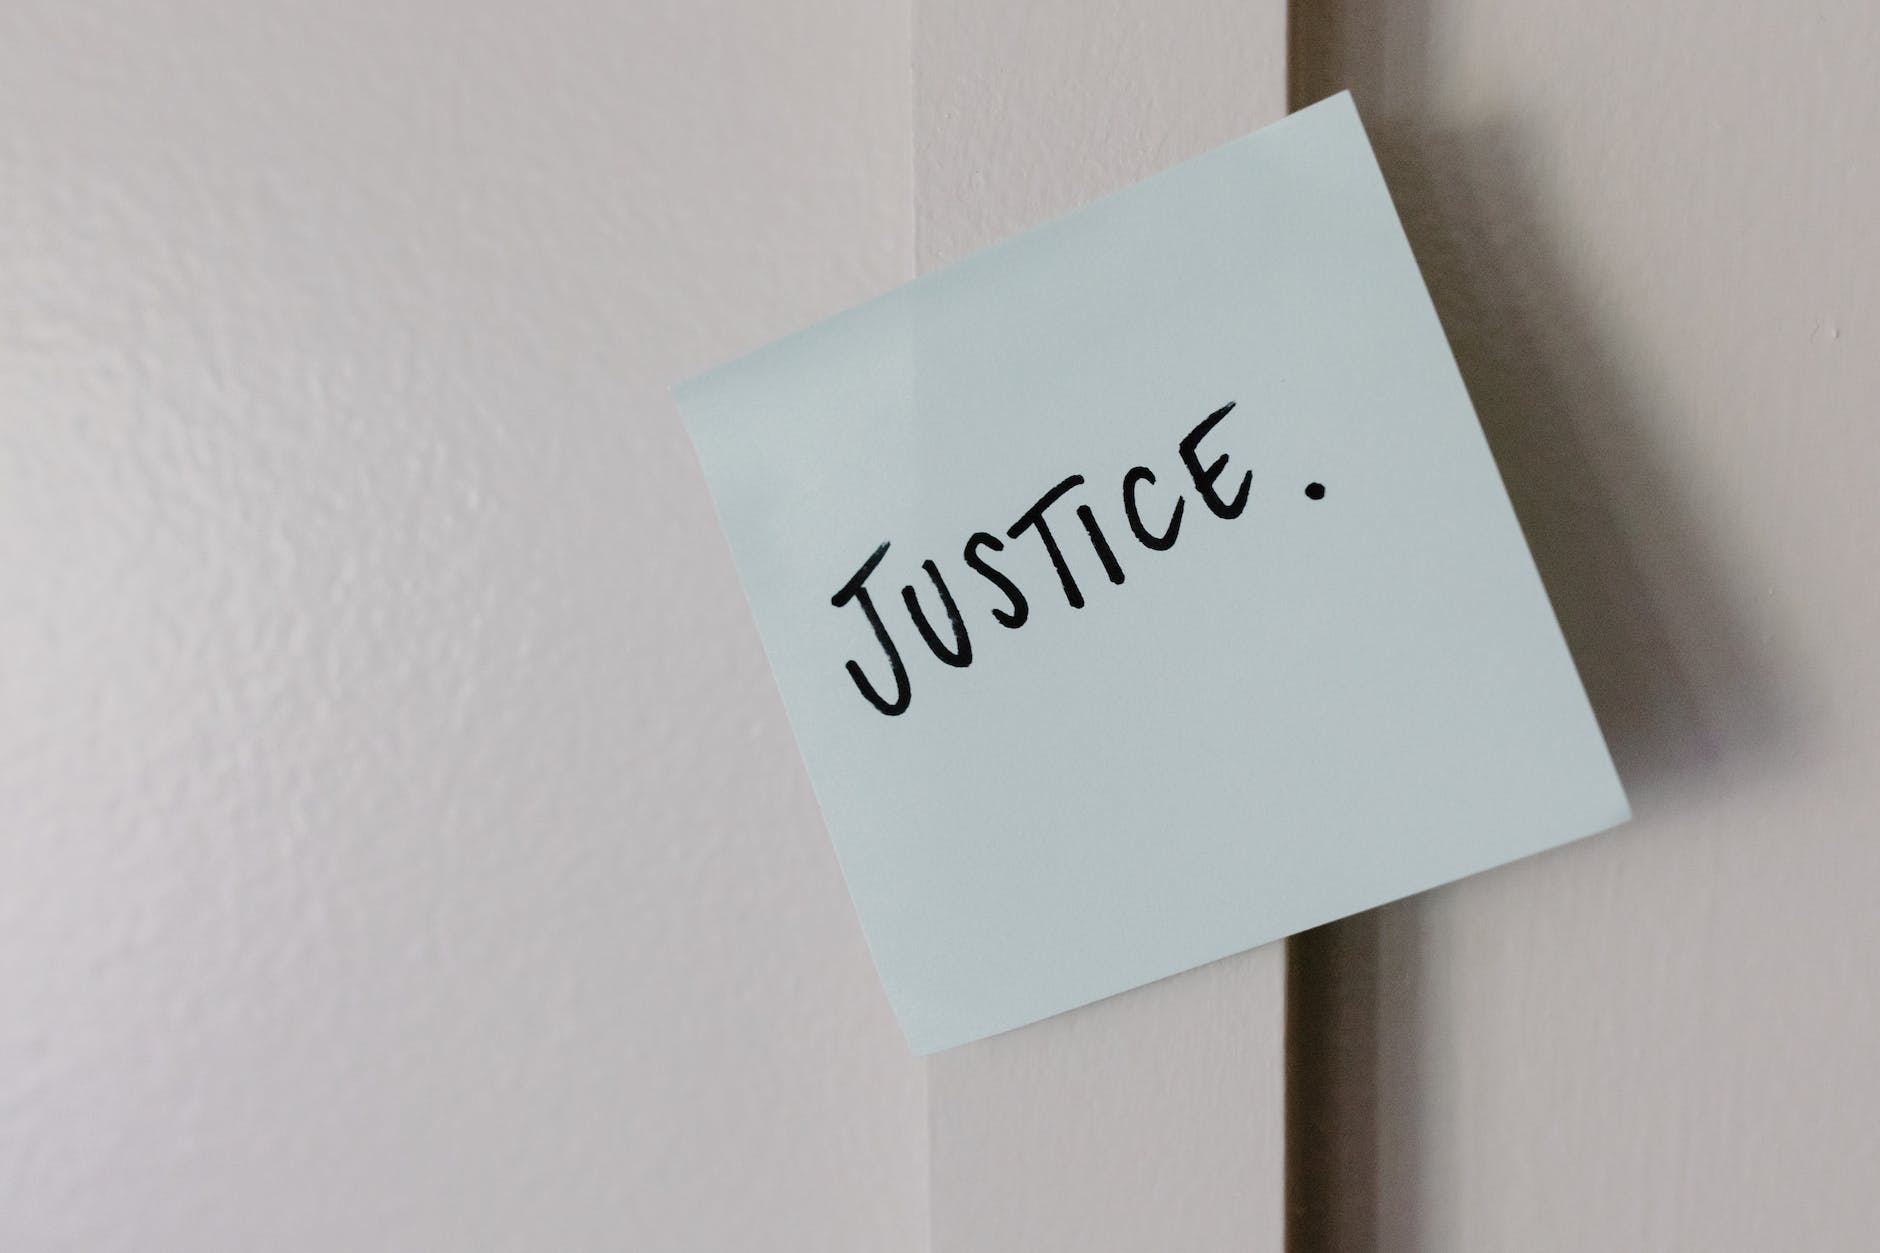 the word justice written on paper